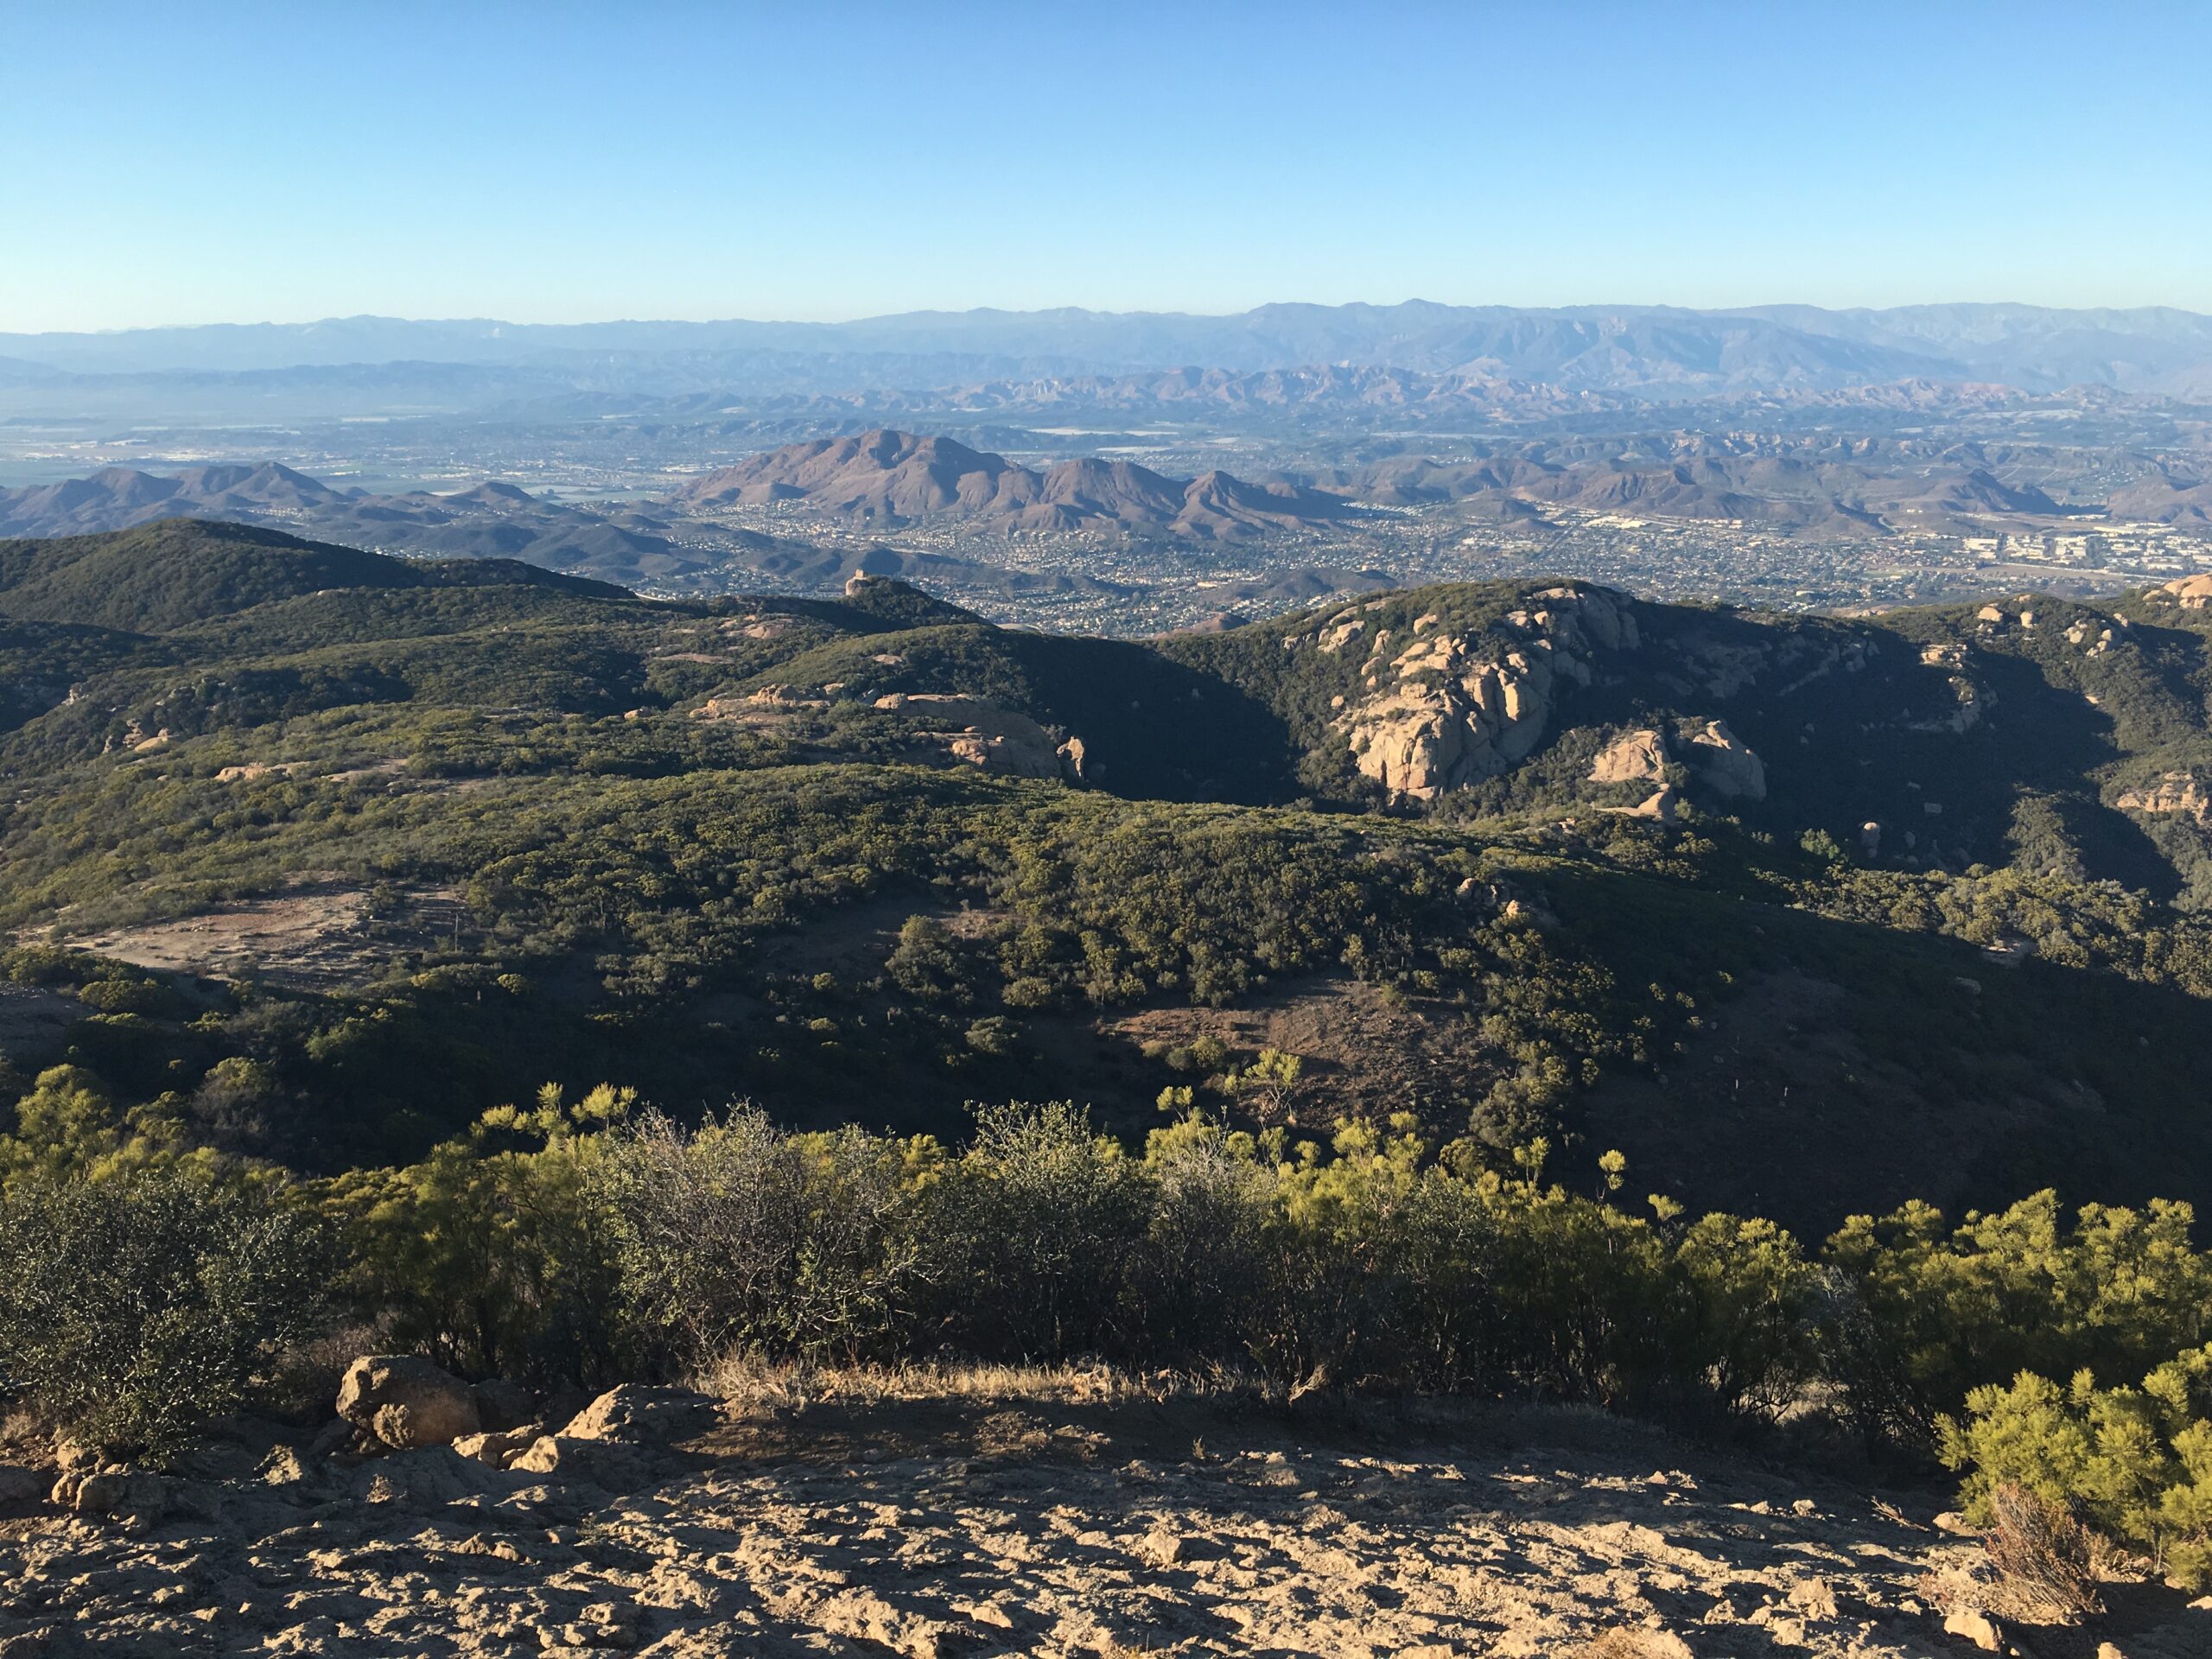 A view from Sandstone Peak